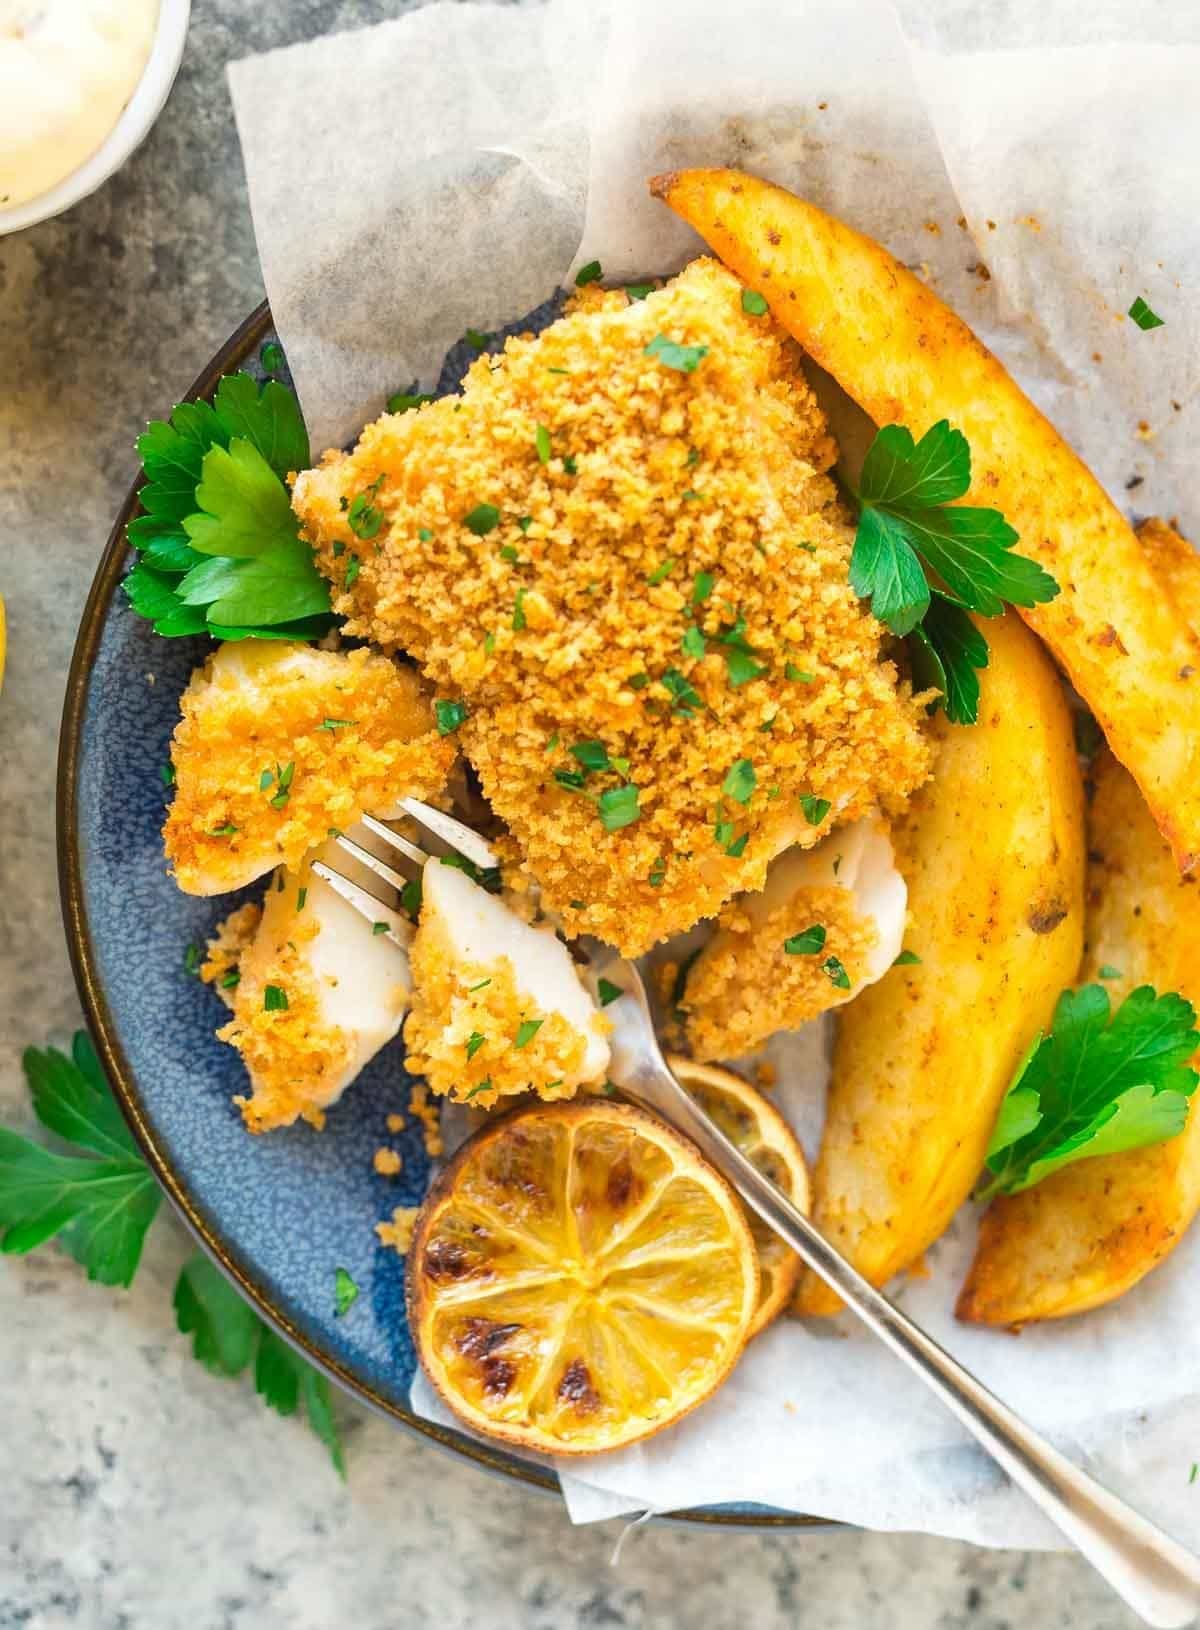 Stove Baked Fish and Chips Recipe